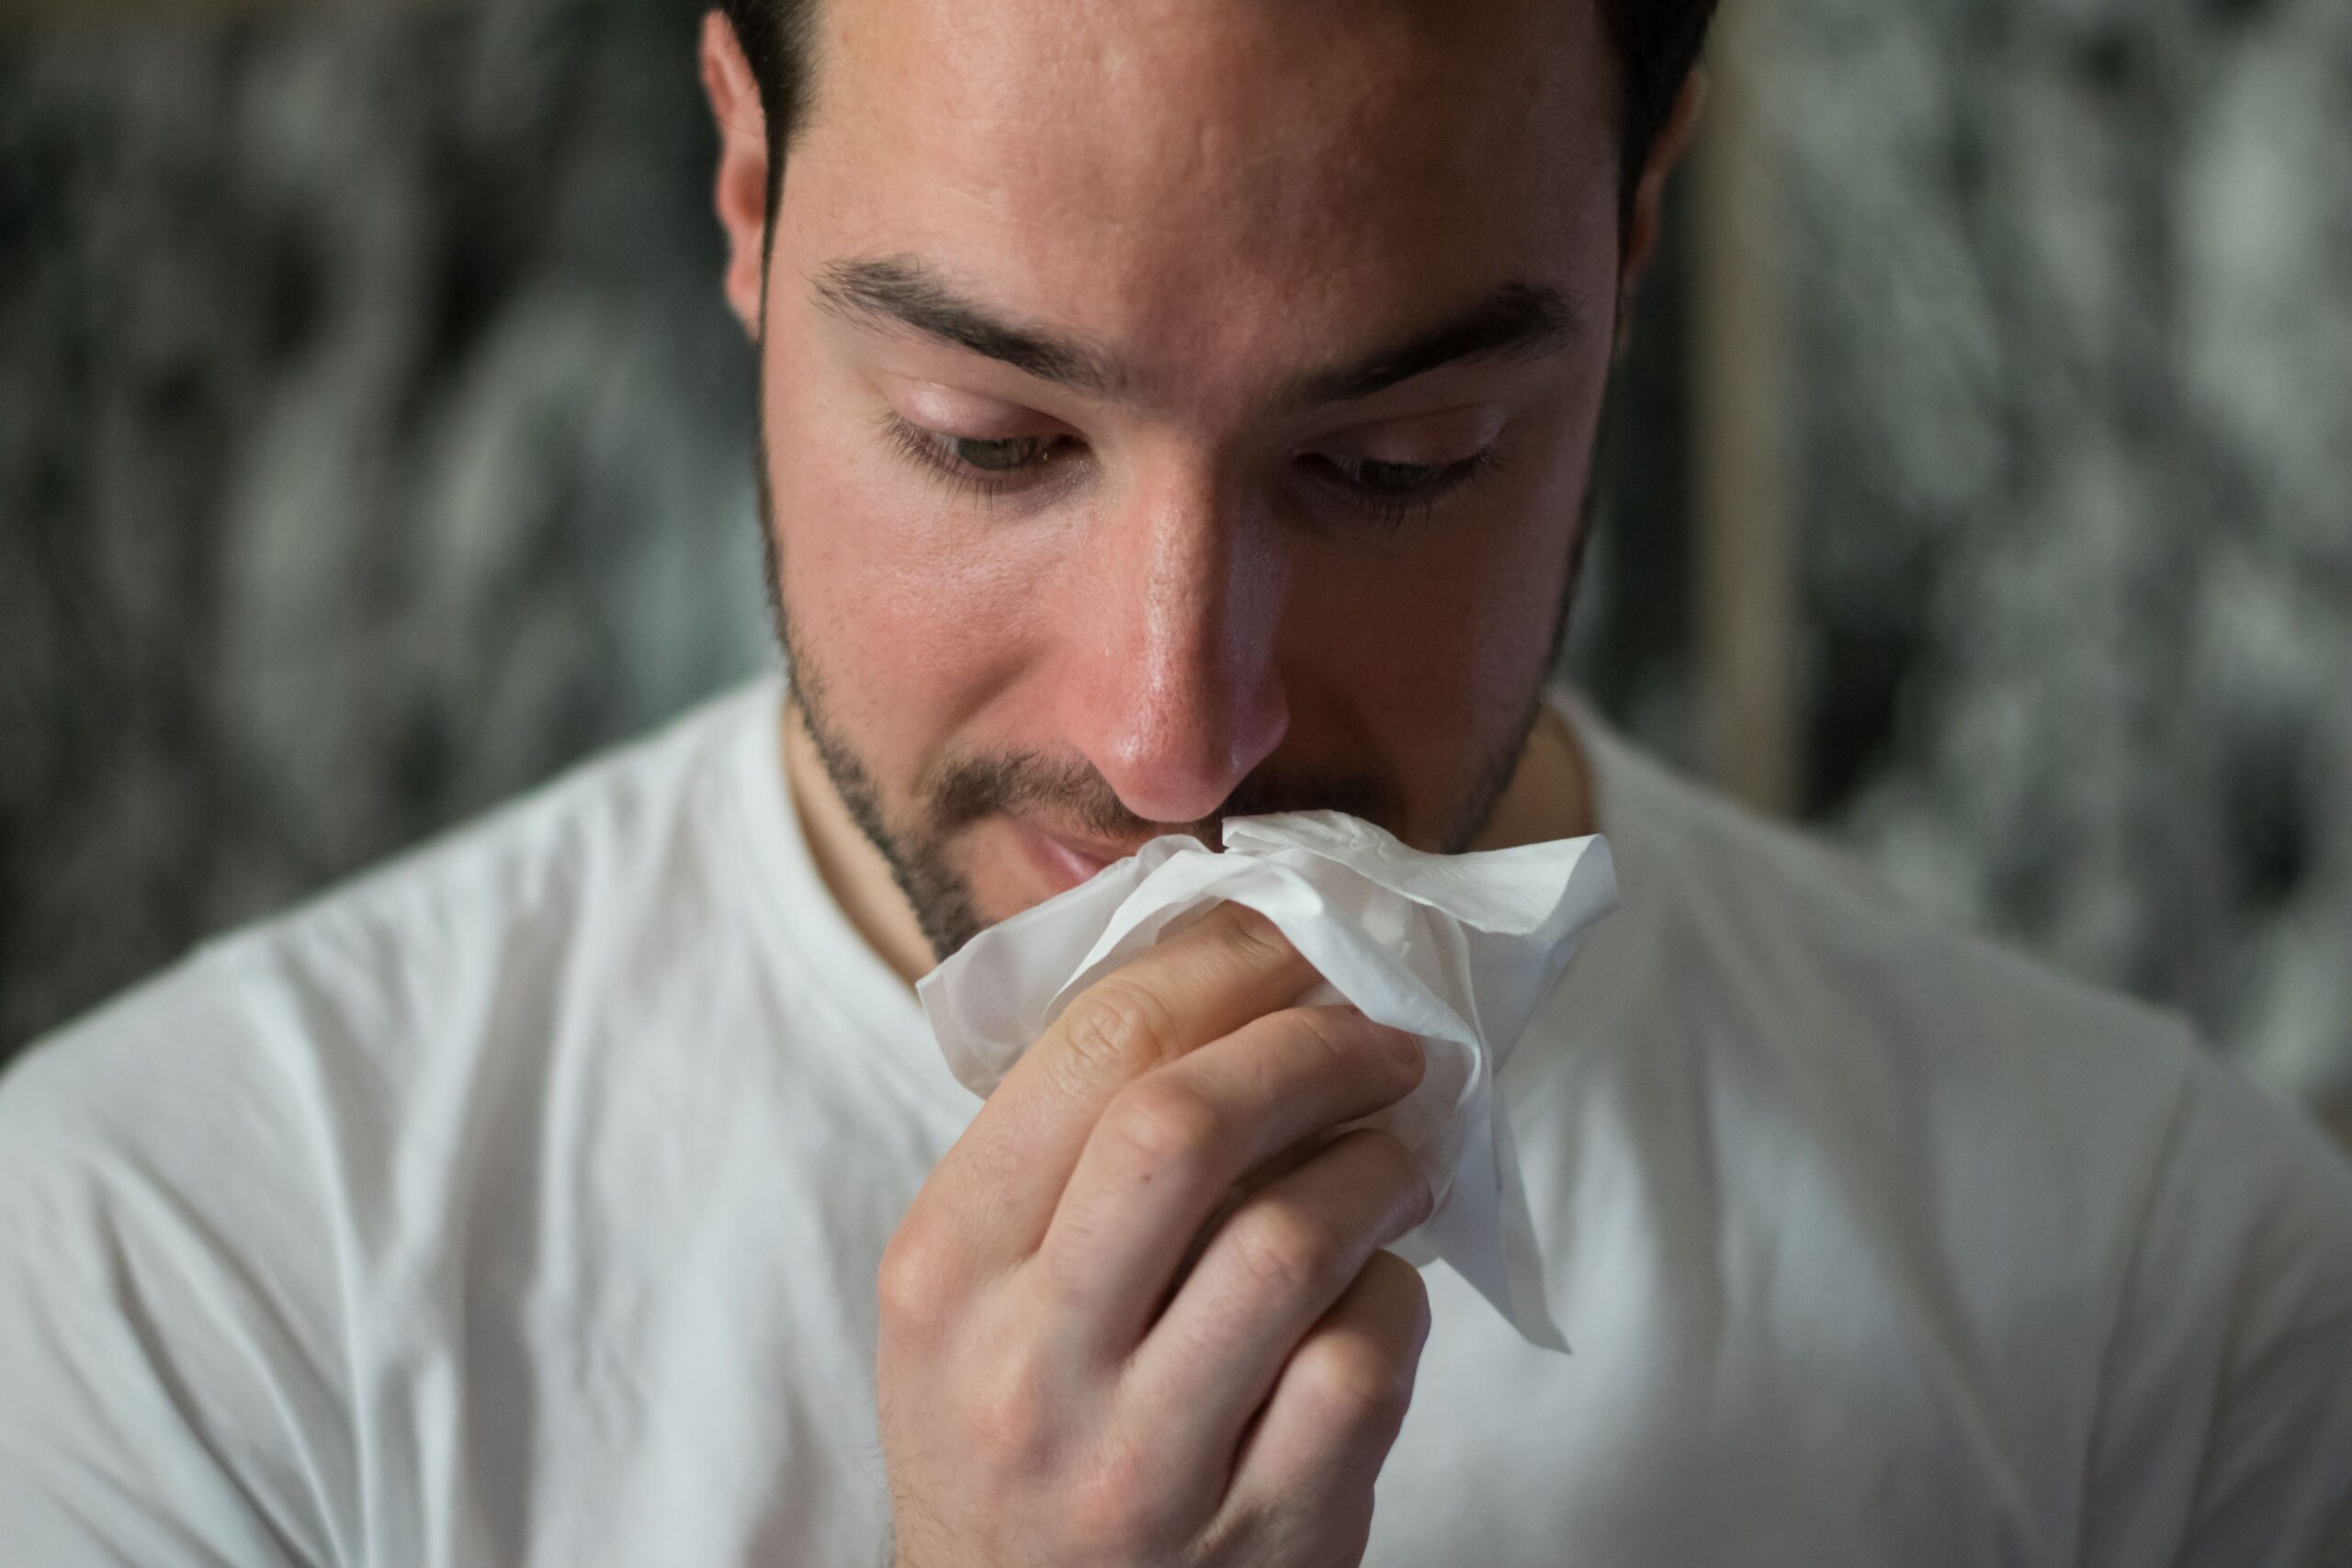 allergies and asthma or illness : person wiping nose with tissue